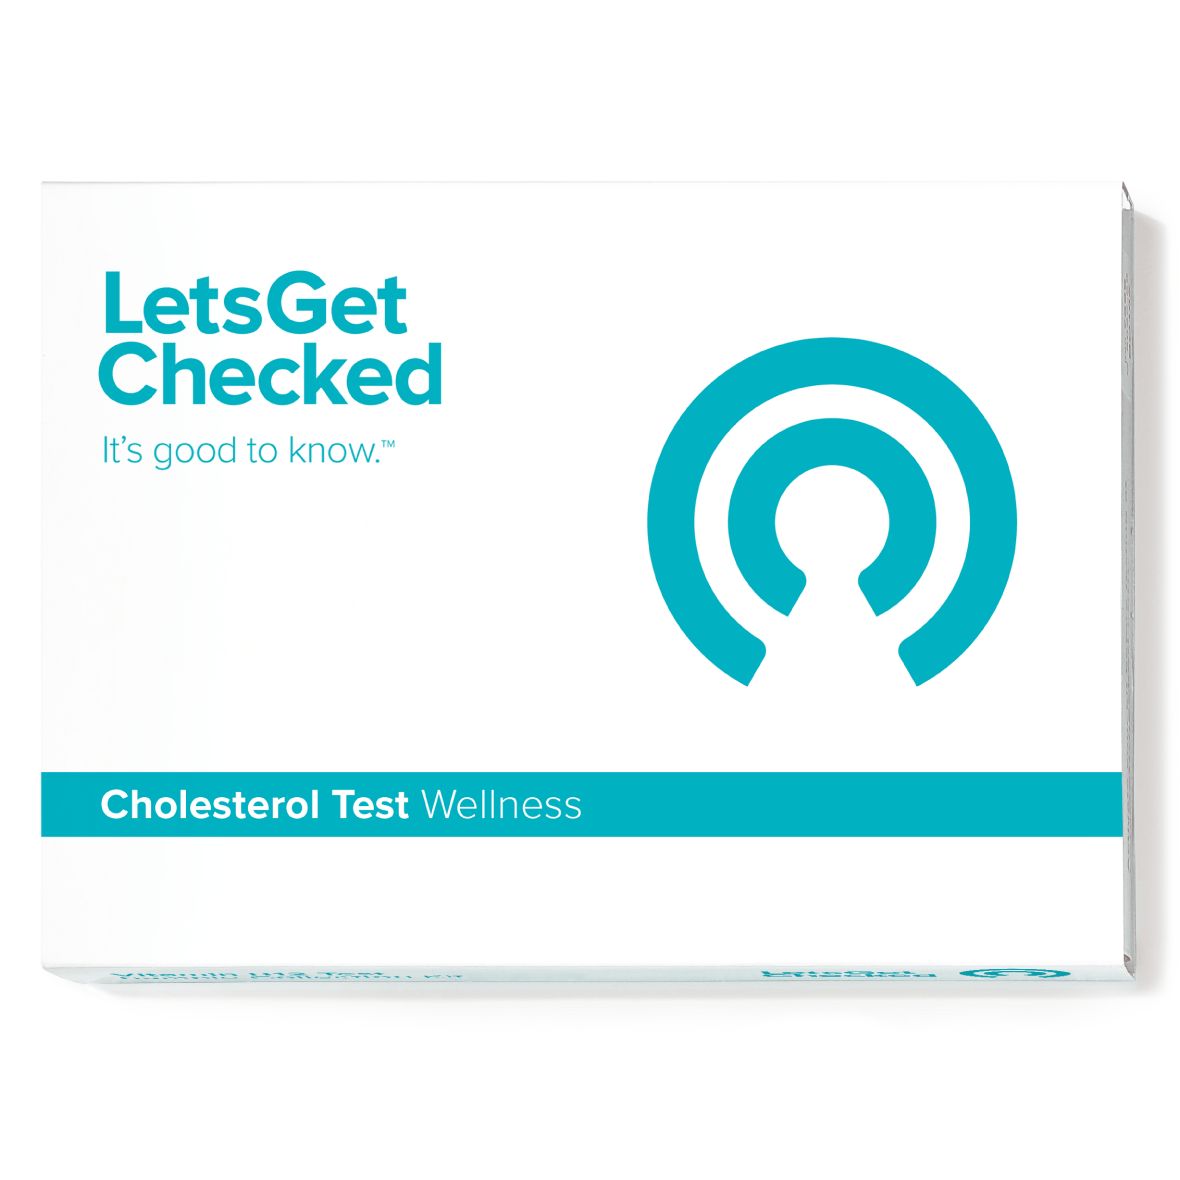 LetsGetChecked Cholesterol & Heart Test